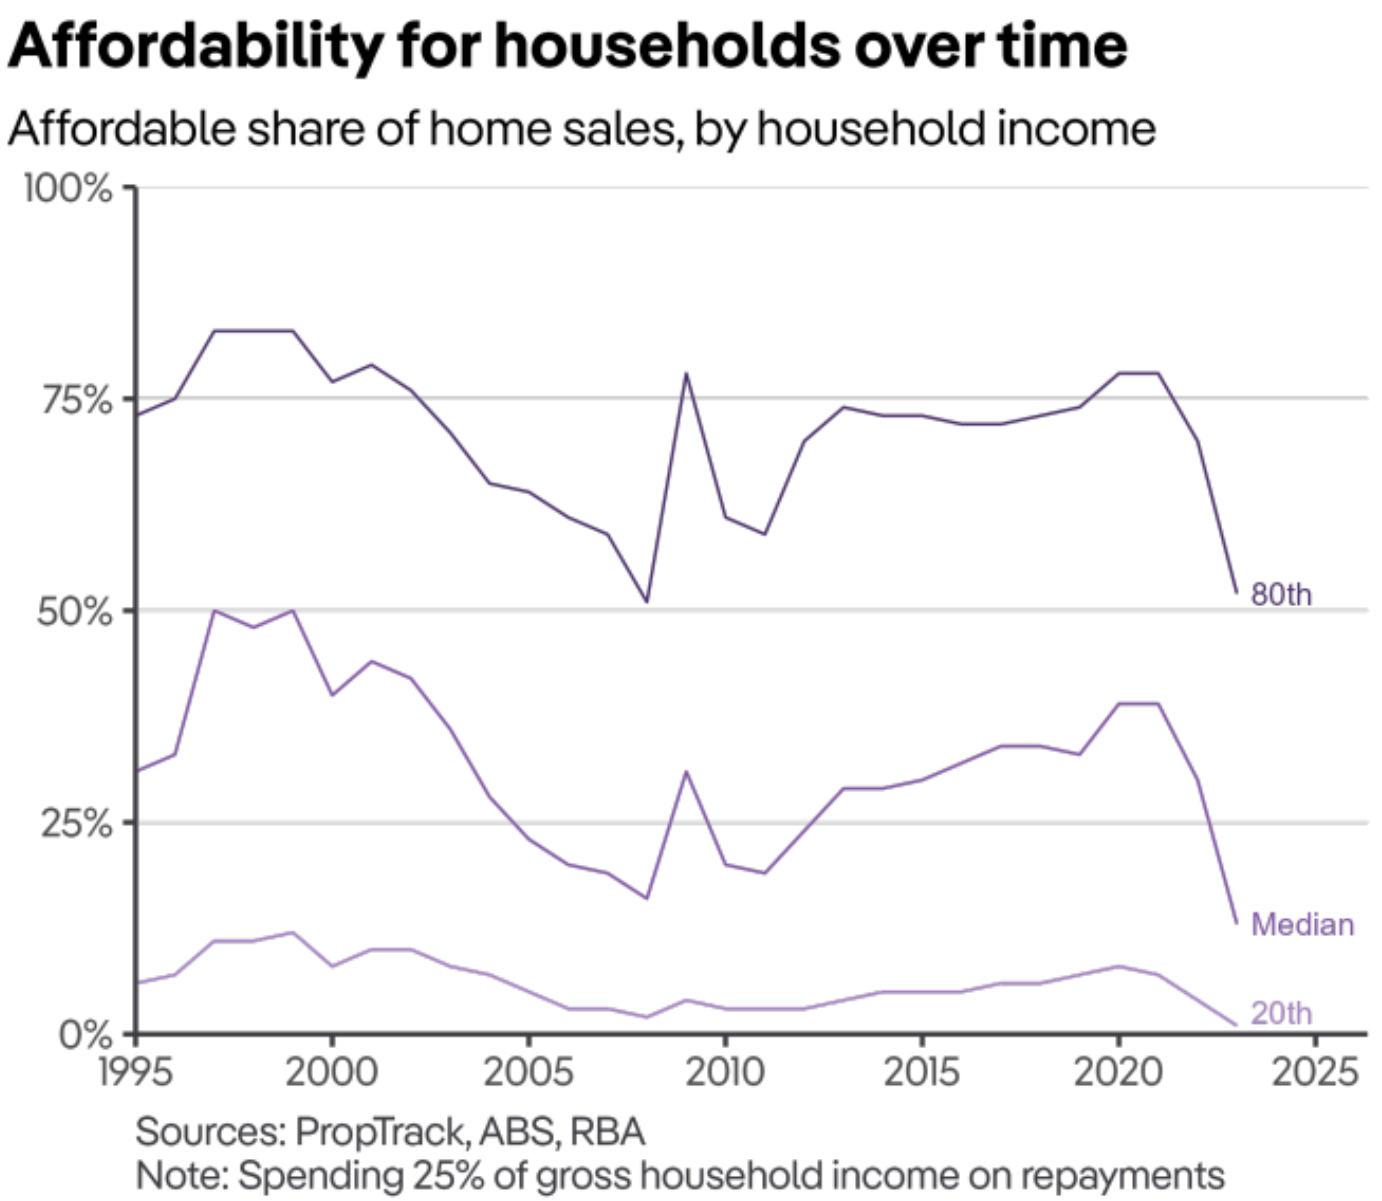 Affordability for households